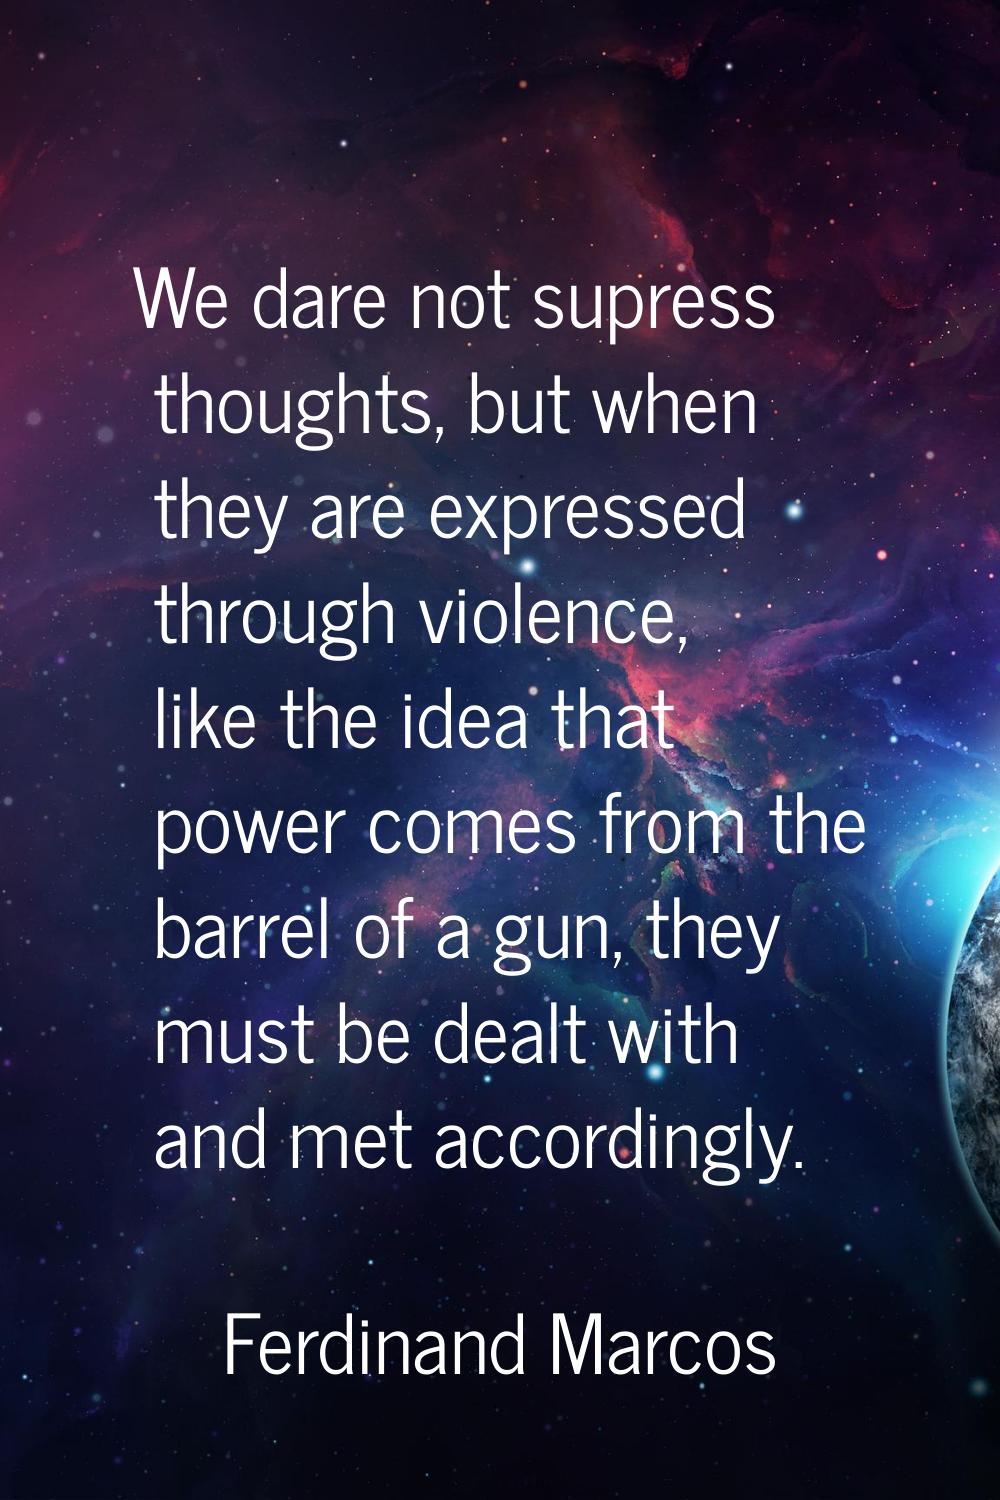 We dare not supress thoughts, but when they are expressed through violence, like the idea that powe